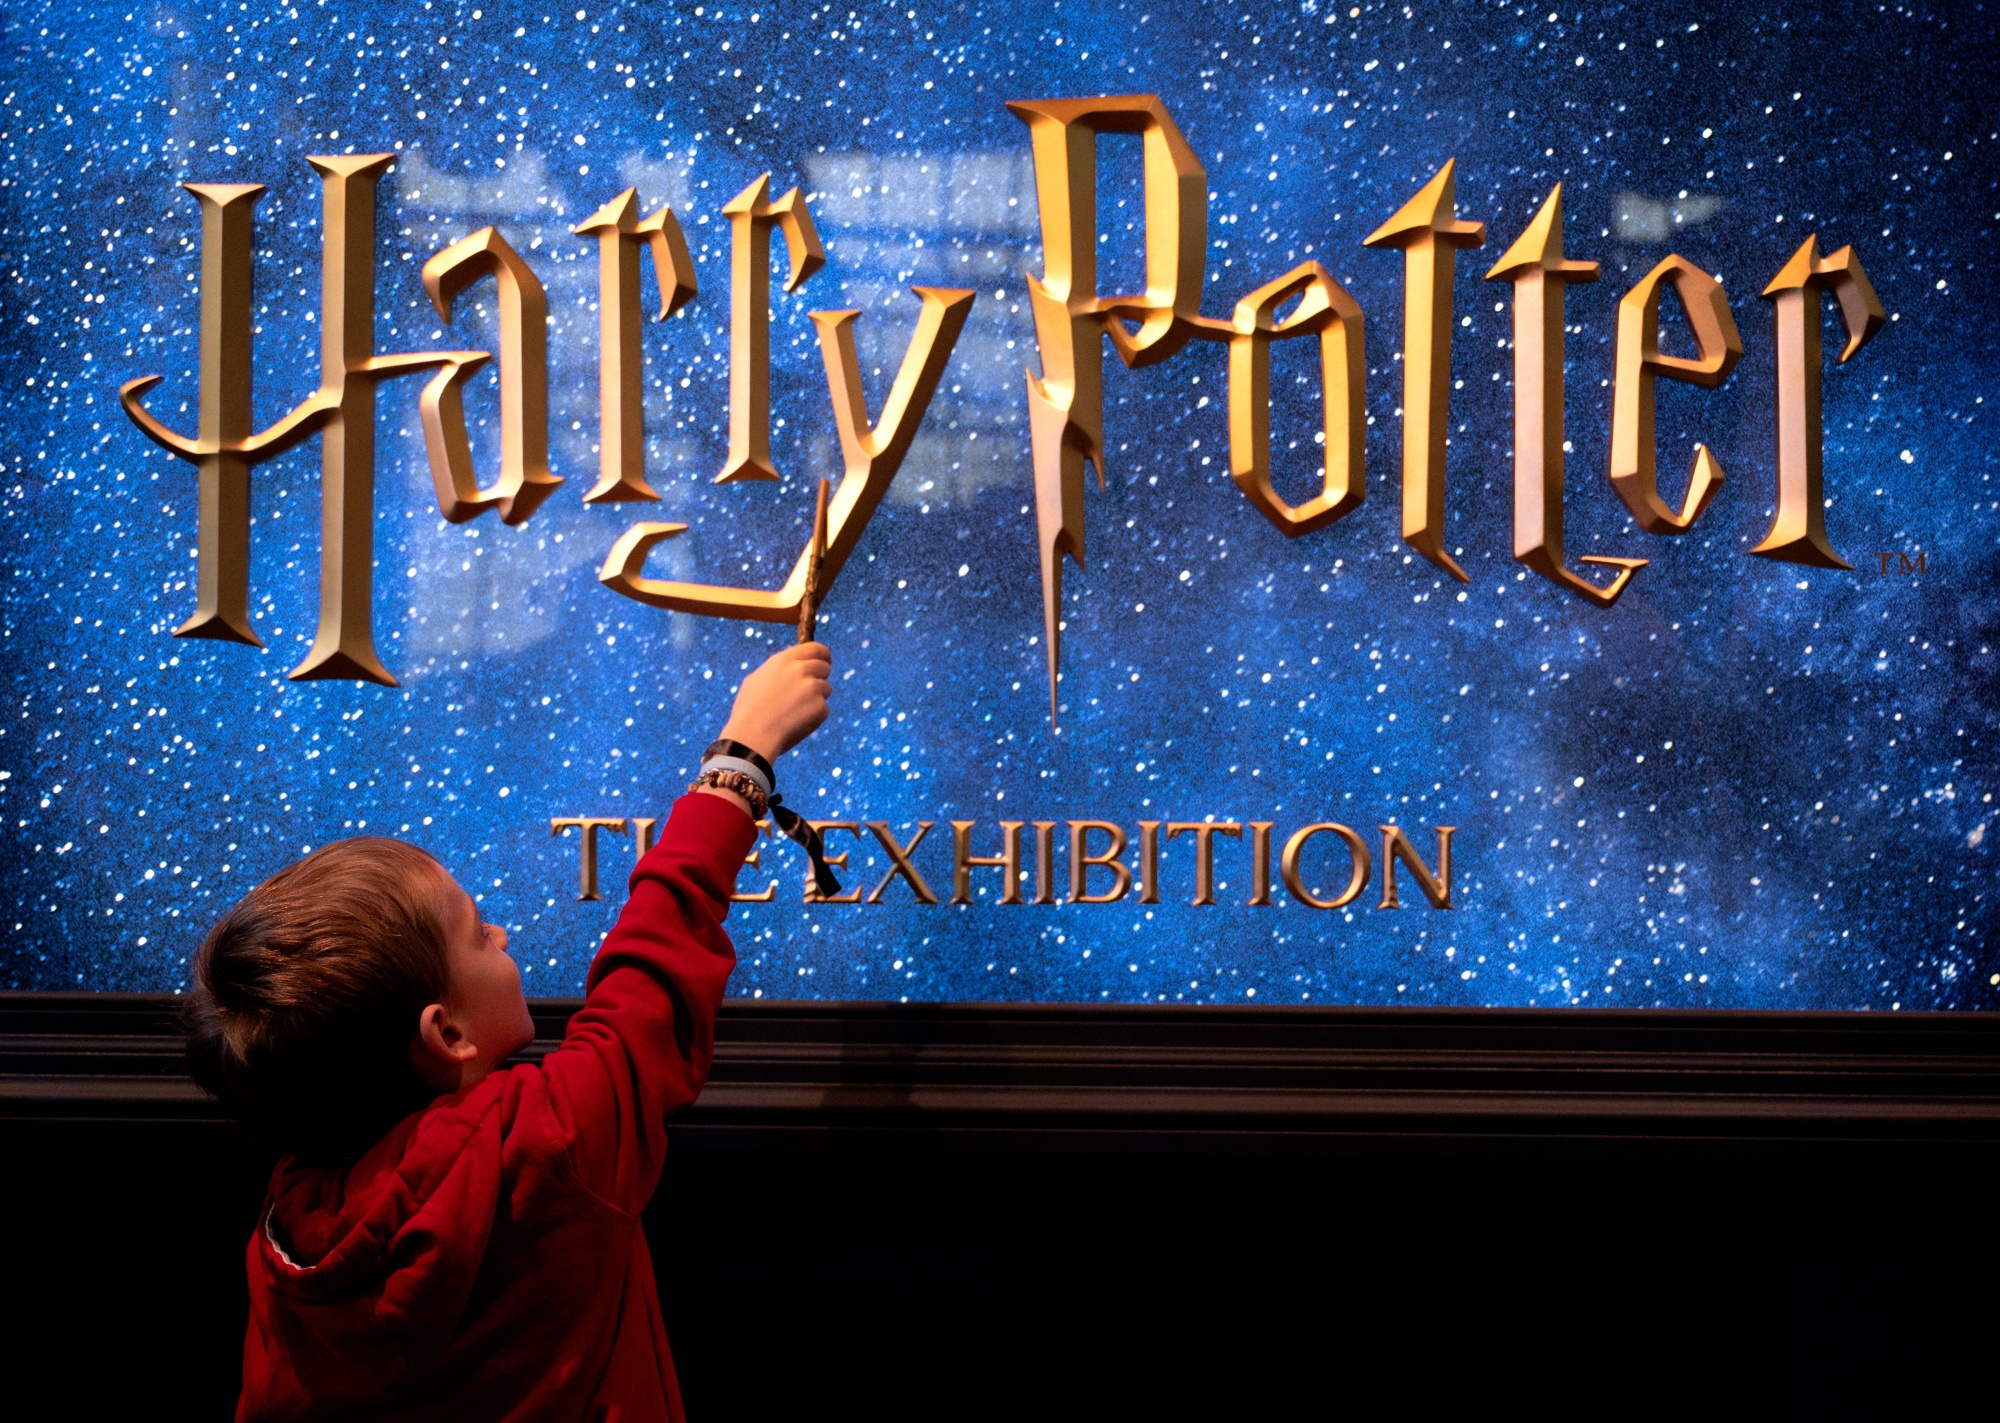 First ever Harry Potter television series ordered by new streaming service,  Max